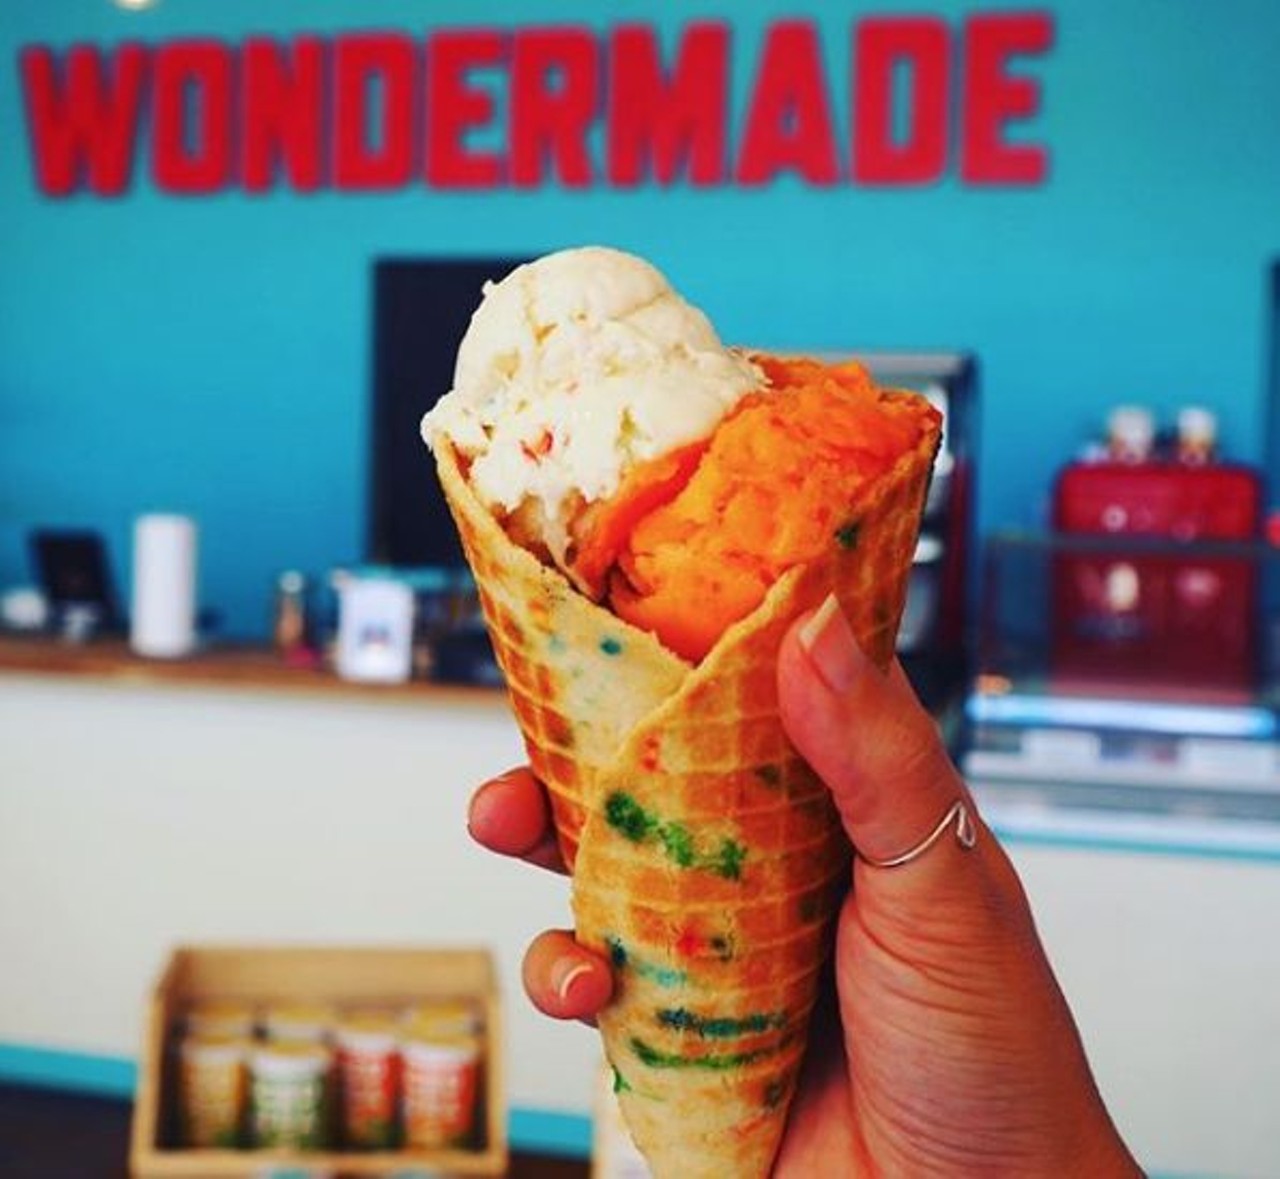 Wondermade Caf&eacute;
214 E. First St., Sanford, 407-205-9569
Marshmallow lovers, meet your match. This unique caf&eacute; puts the dessert on a stick, in a s'more or in a cup of hot Lineage coffee. 
Photo via sibilaman/ Instagram